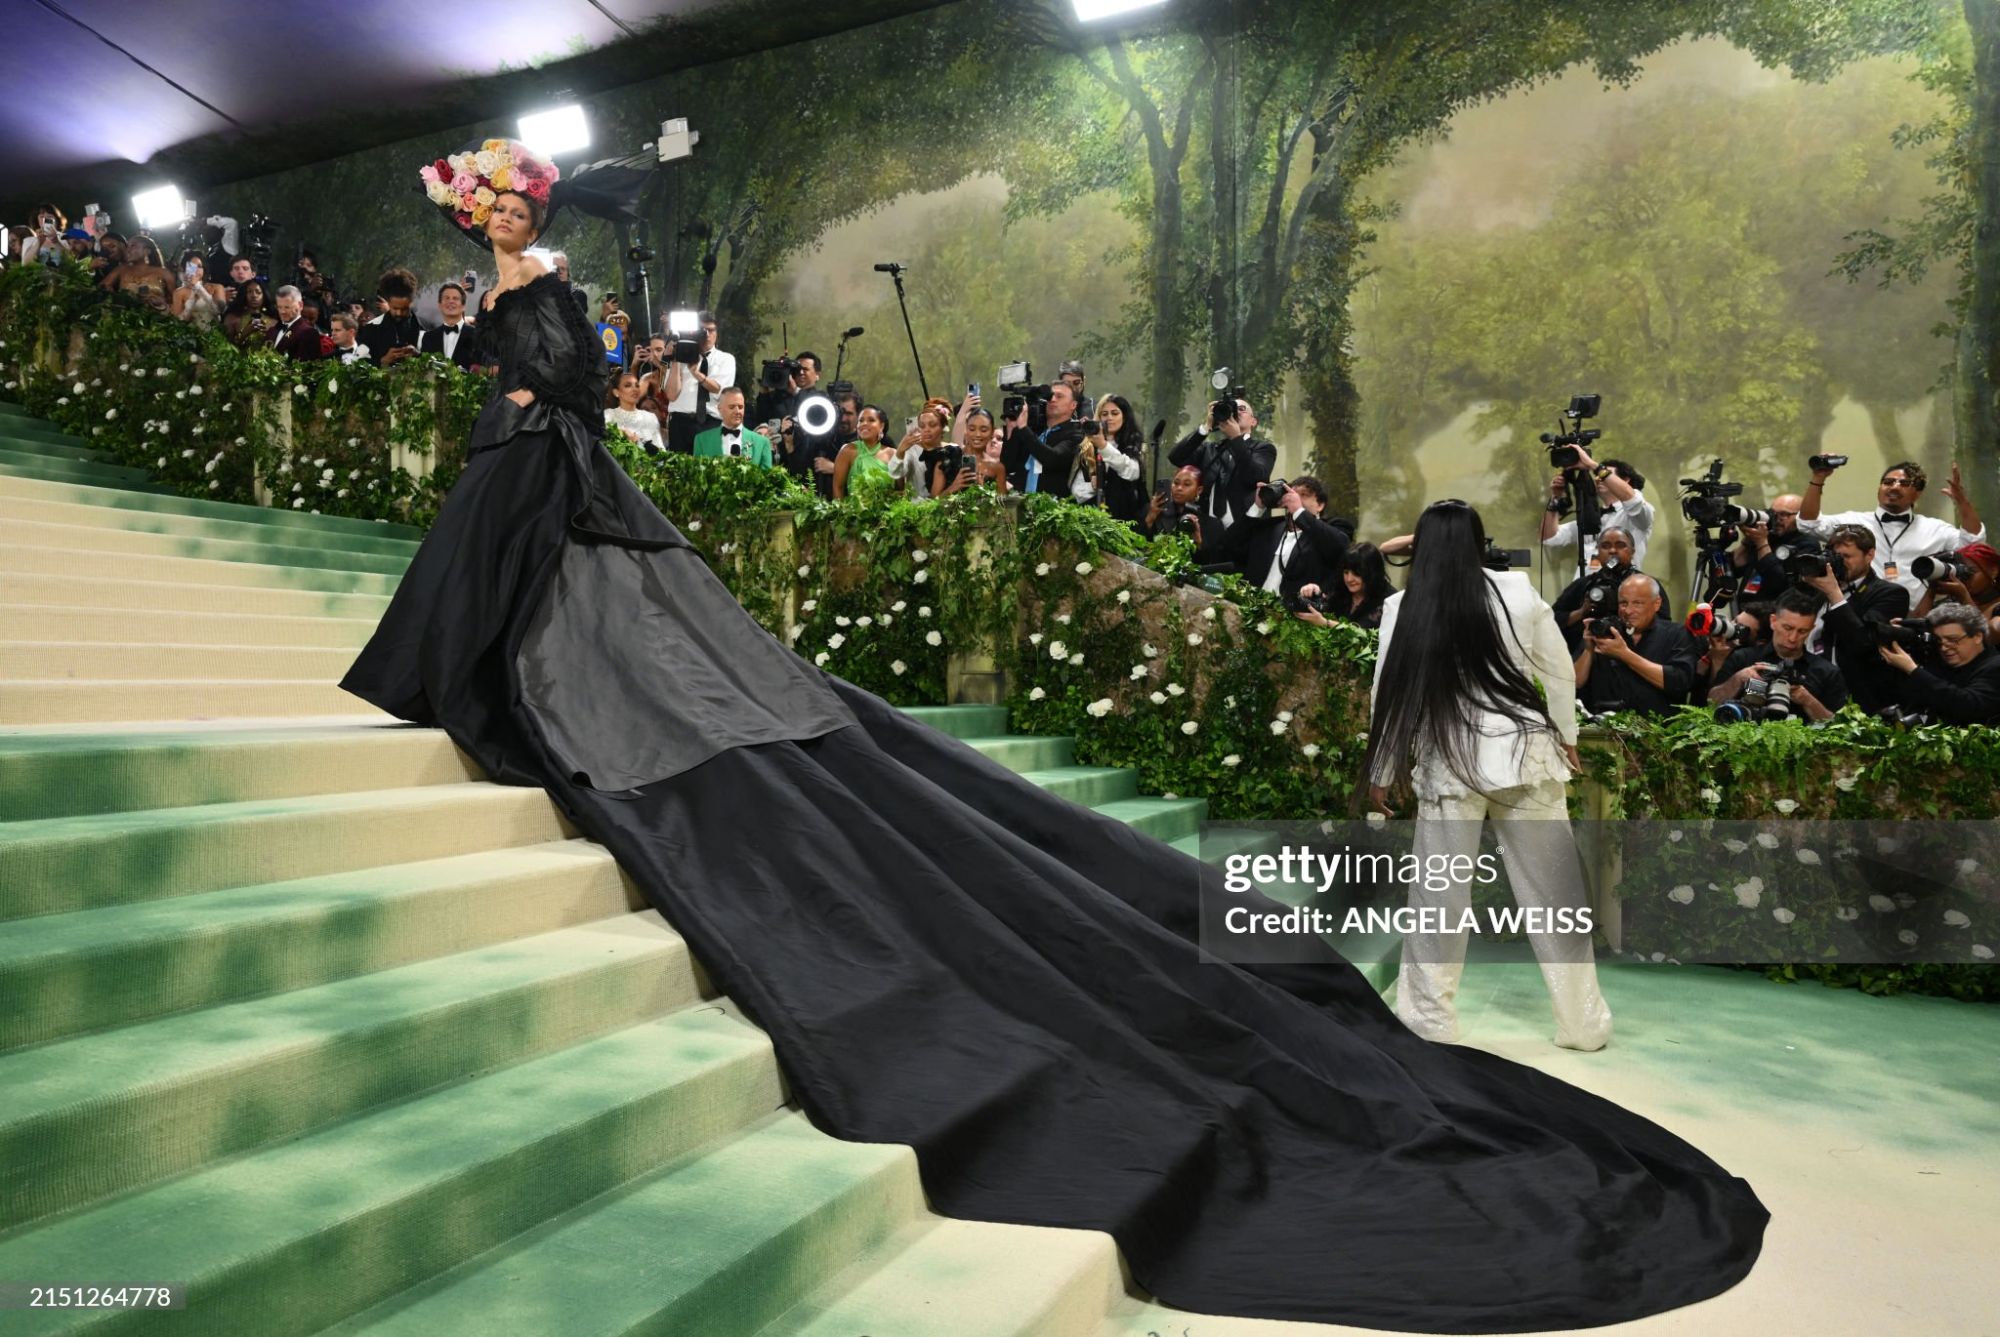 gettyimages-2151264778-2048x2048.jpg